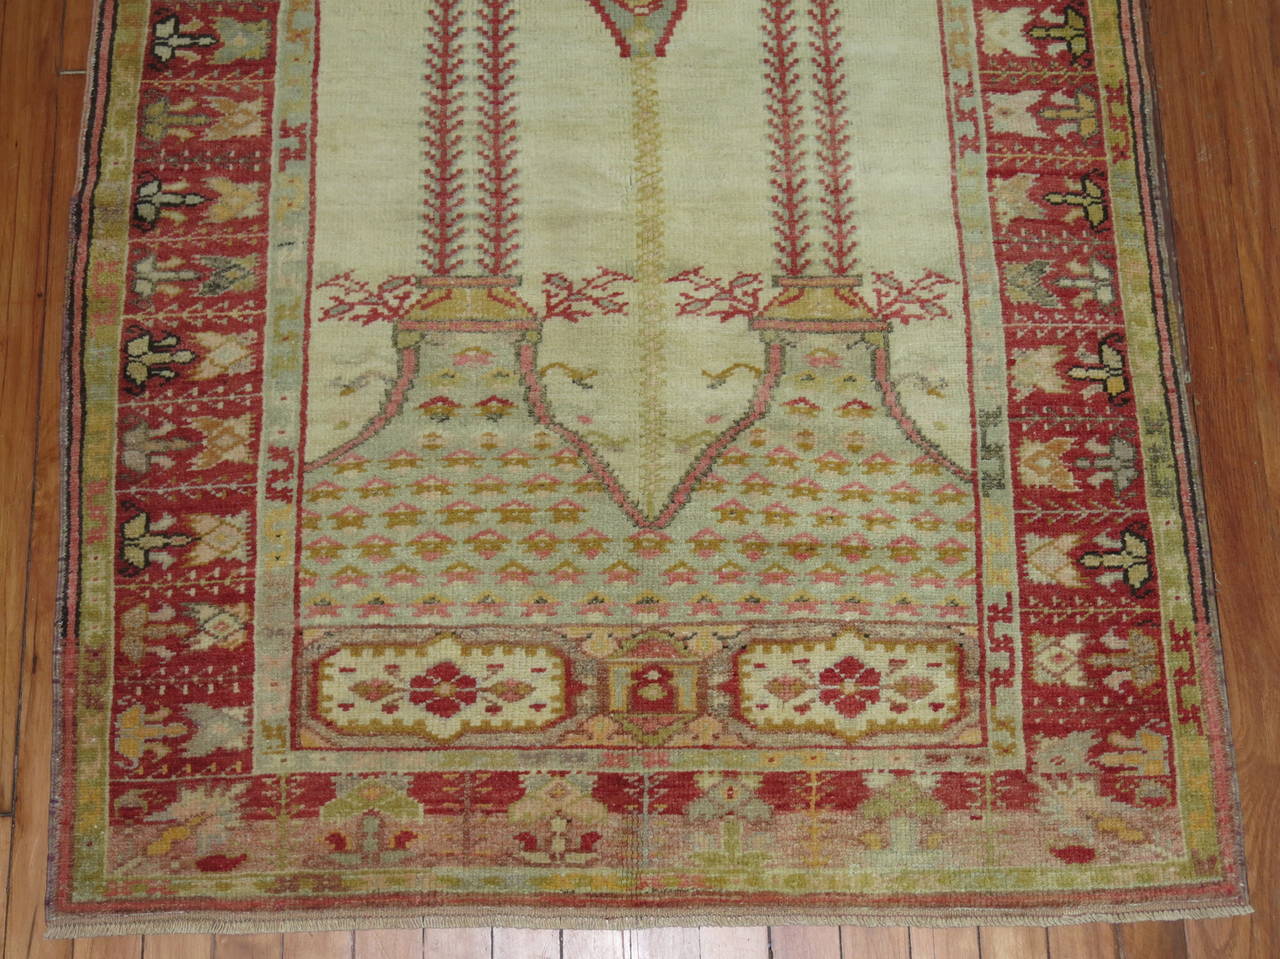 Early 20th century Turkish Oushak prayer throw rug. Ivory field and red border.